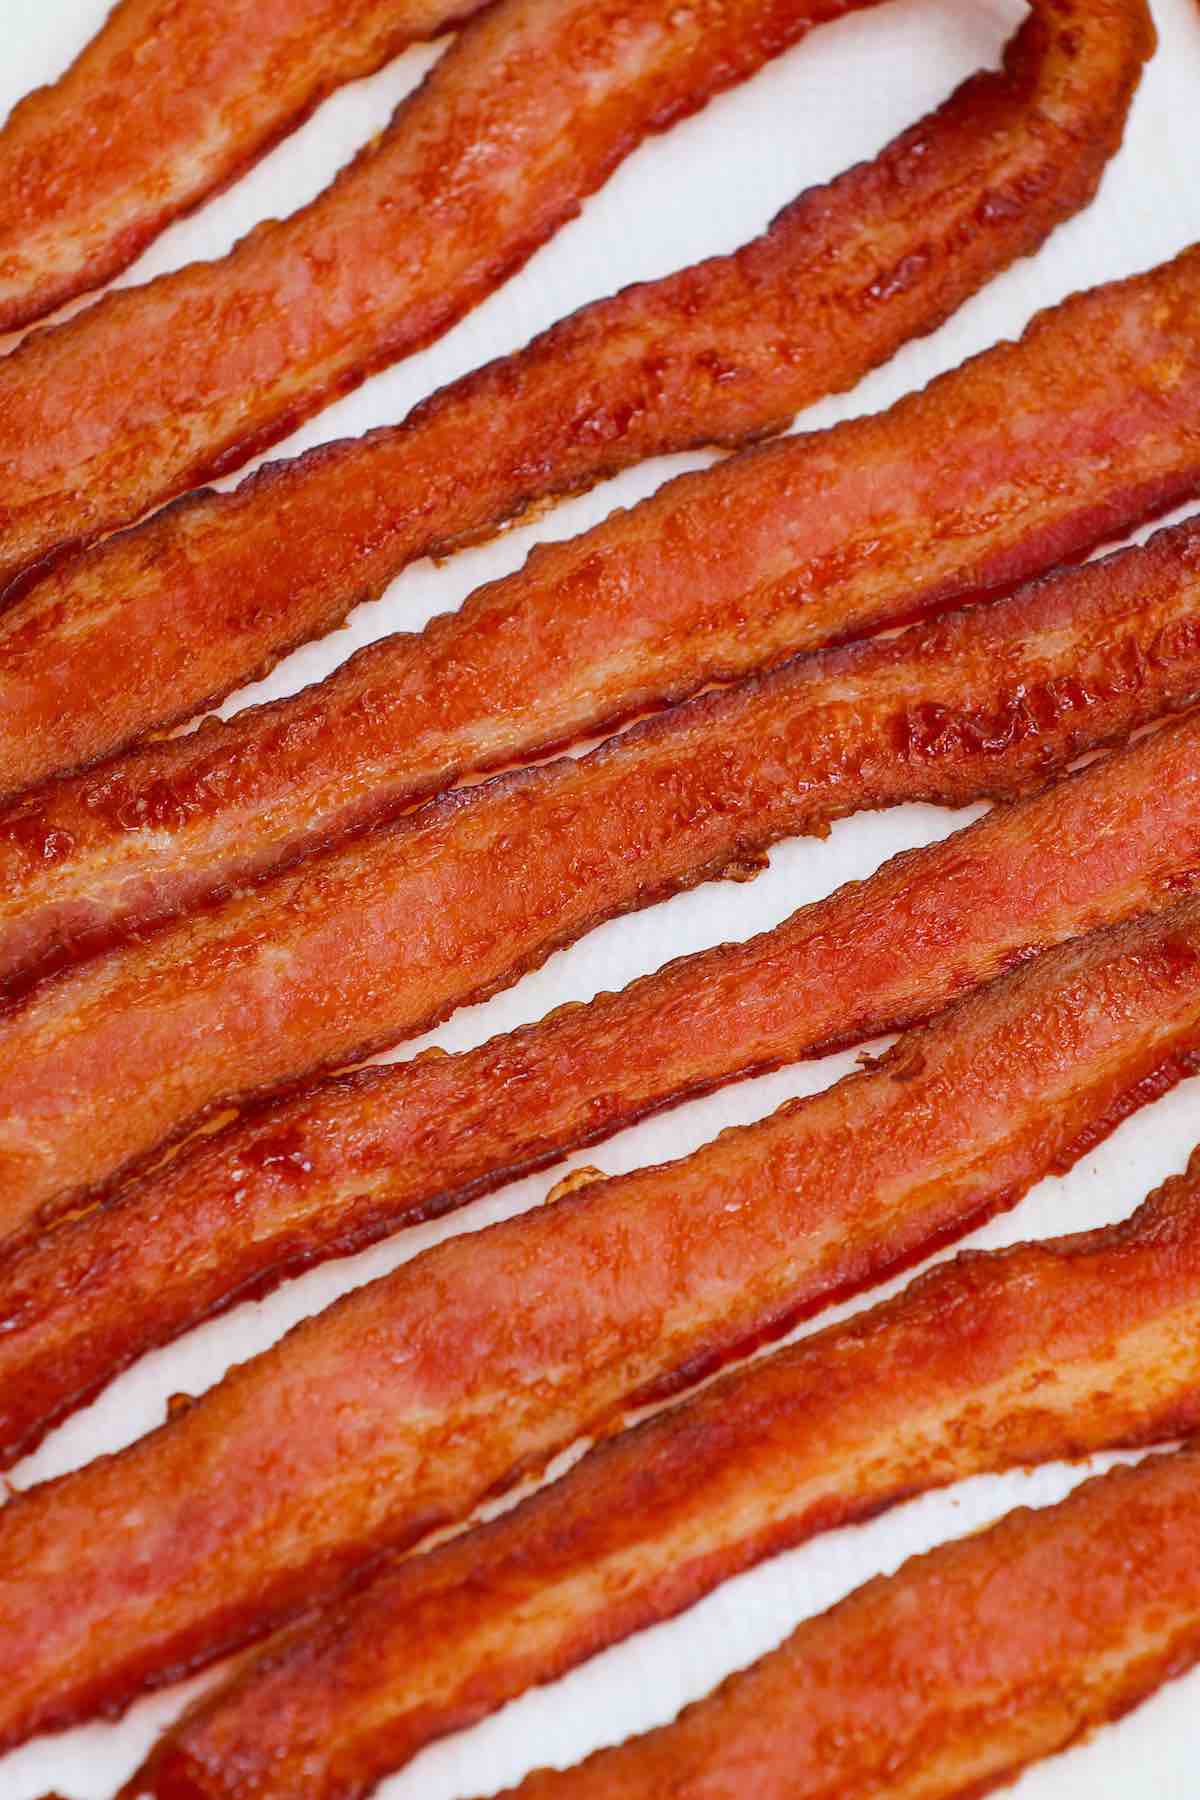 When bacon isn’t stored in proper conditions, or if it’s been stored for too long, it can become spoiled, just like any other meat. Consuming spoiled food is a health risk, so it’s important to learn how to tell if bacon is bad.